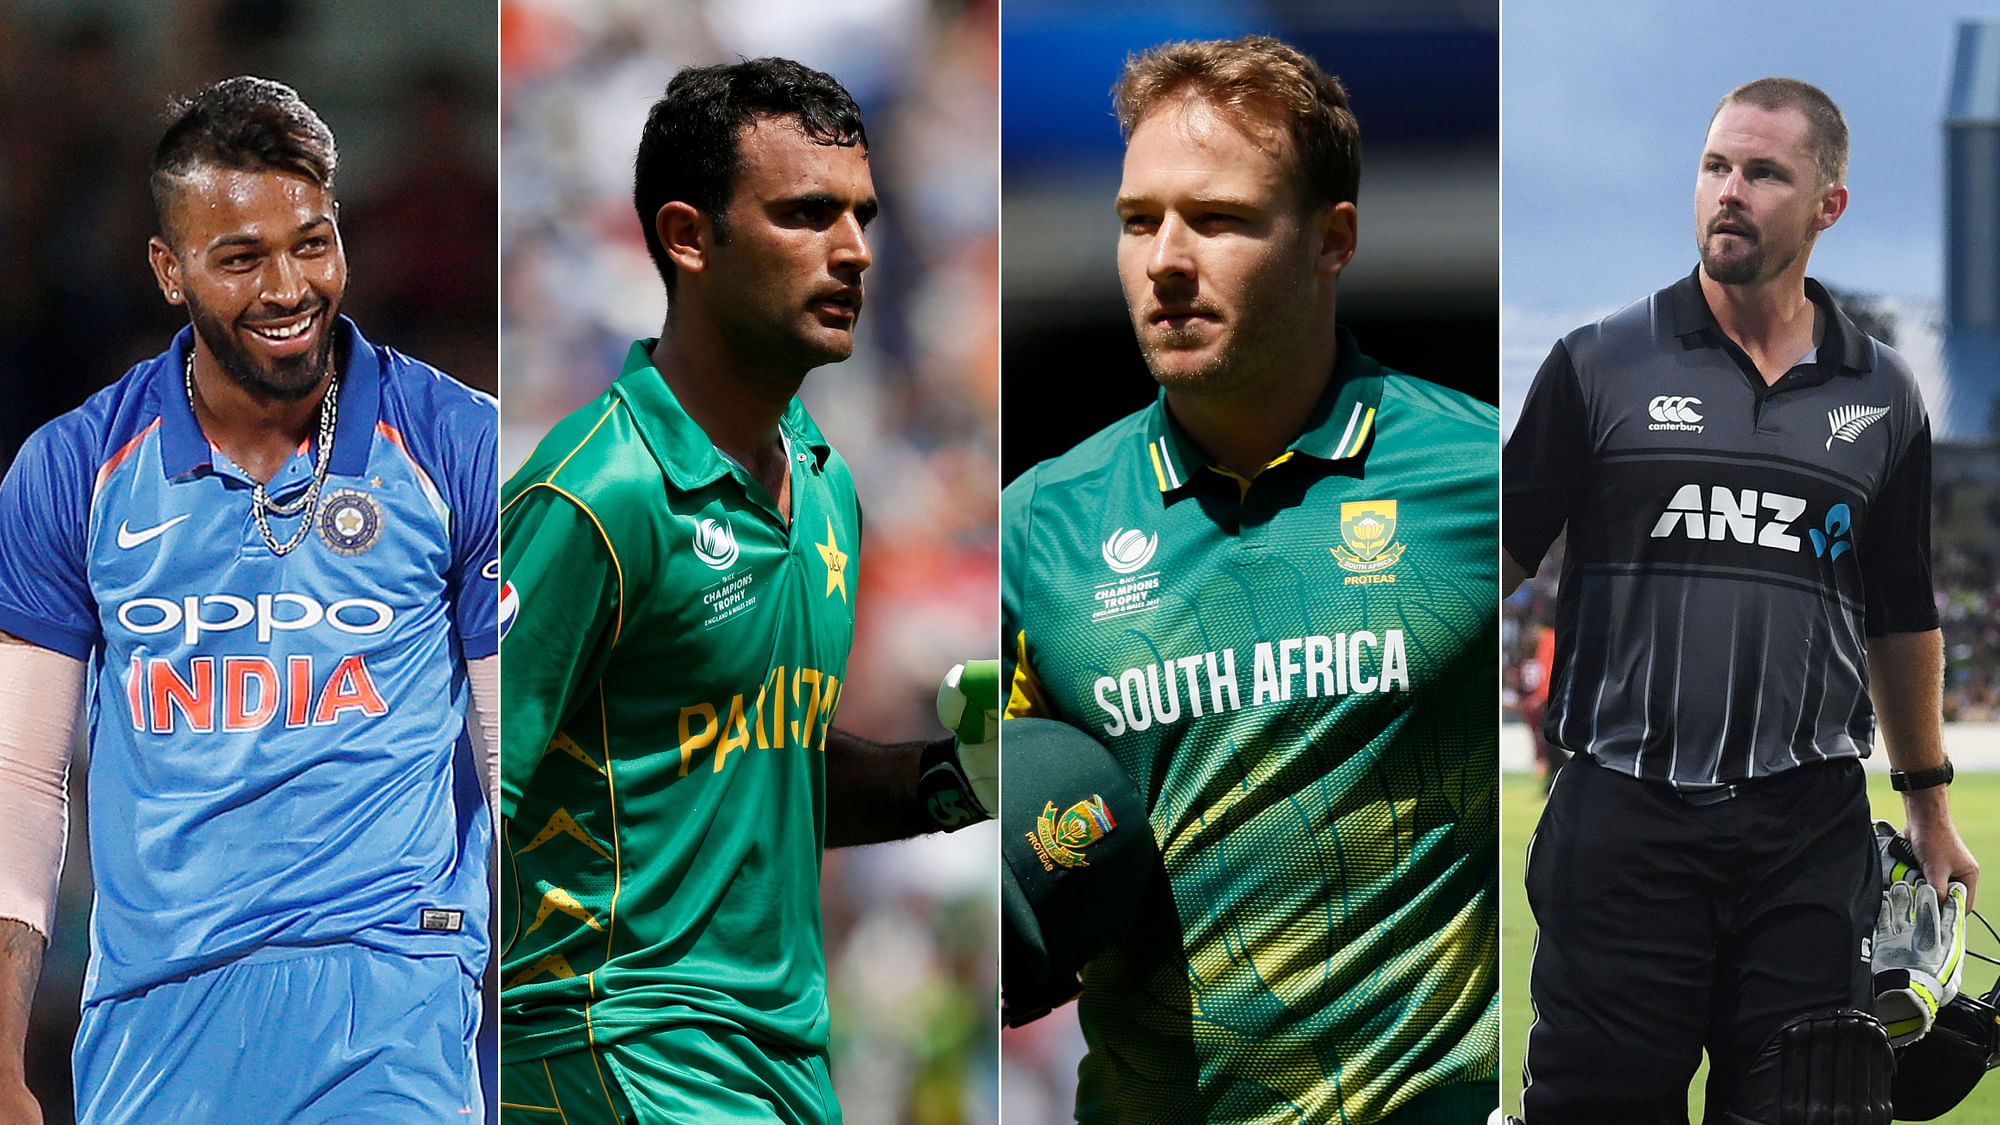 Hardik Pandya, Fakhar Zaman, David Miller and Colin Munro are some of the players who could make big contributions this World Cup.